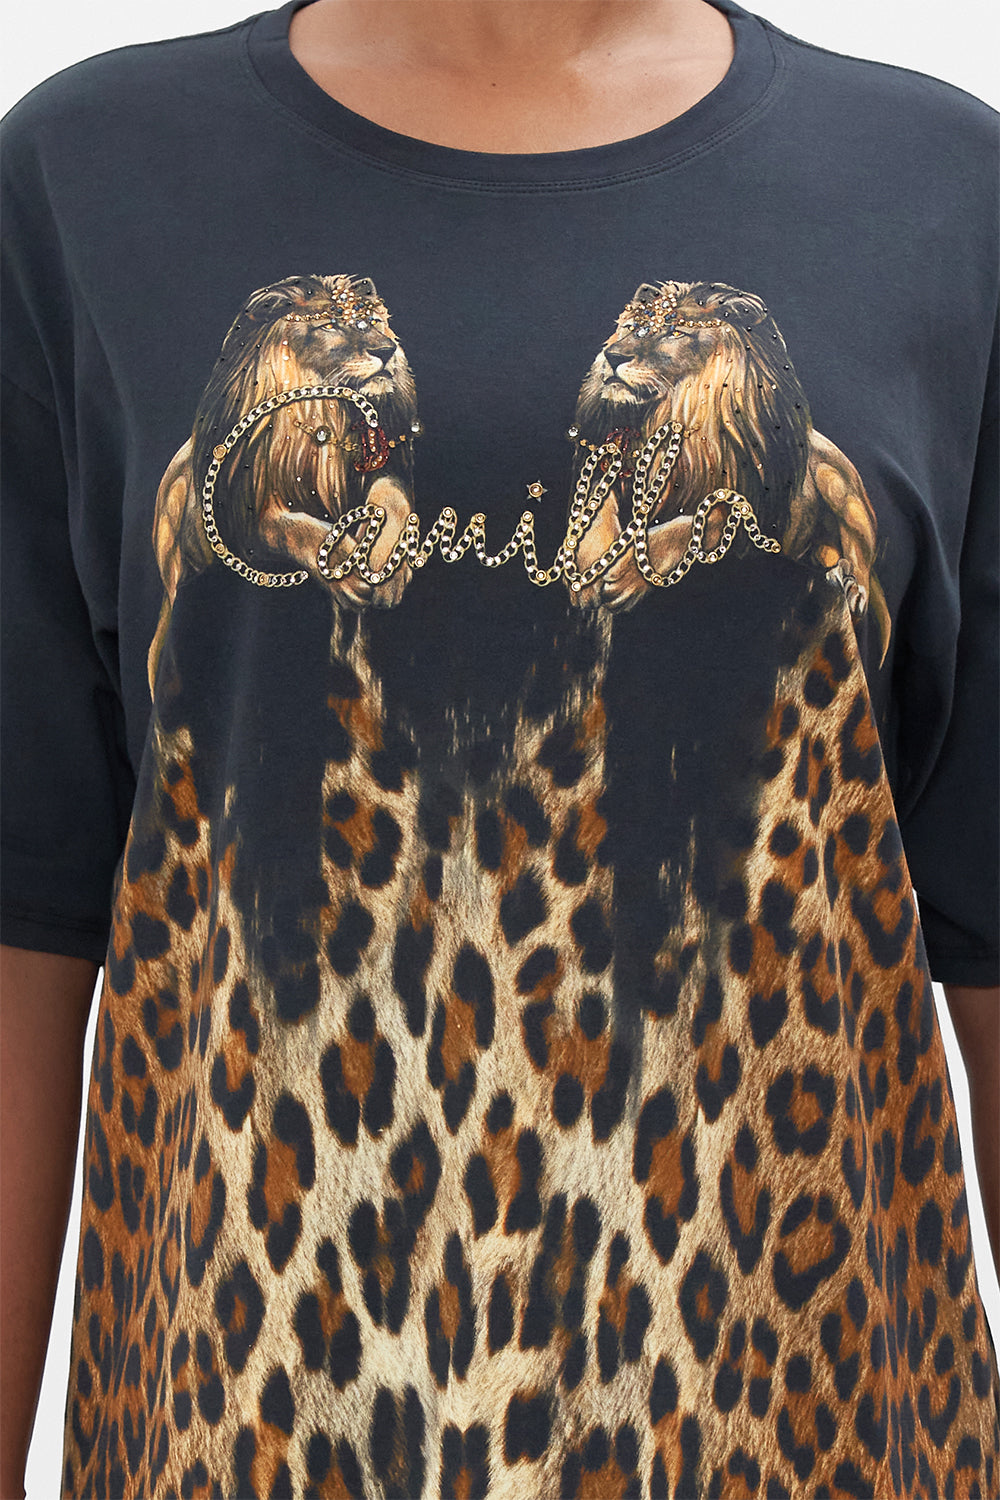 ORGANIC COTTON OVERSIZE BAND TEE - PRINTED JUNGLE DREAMING